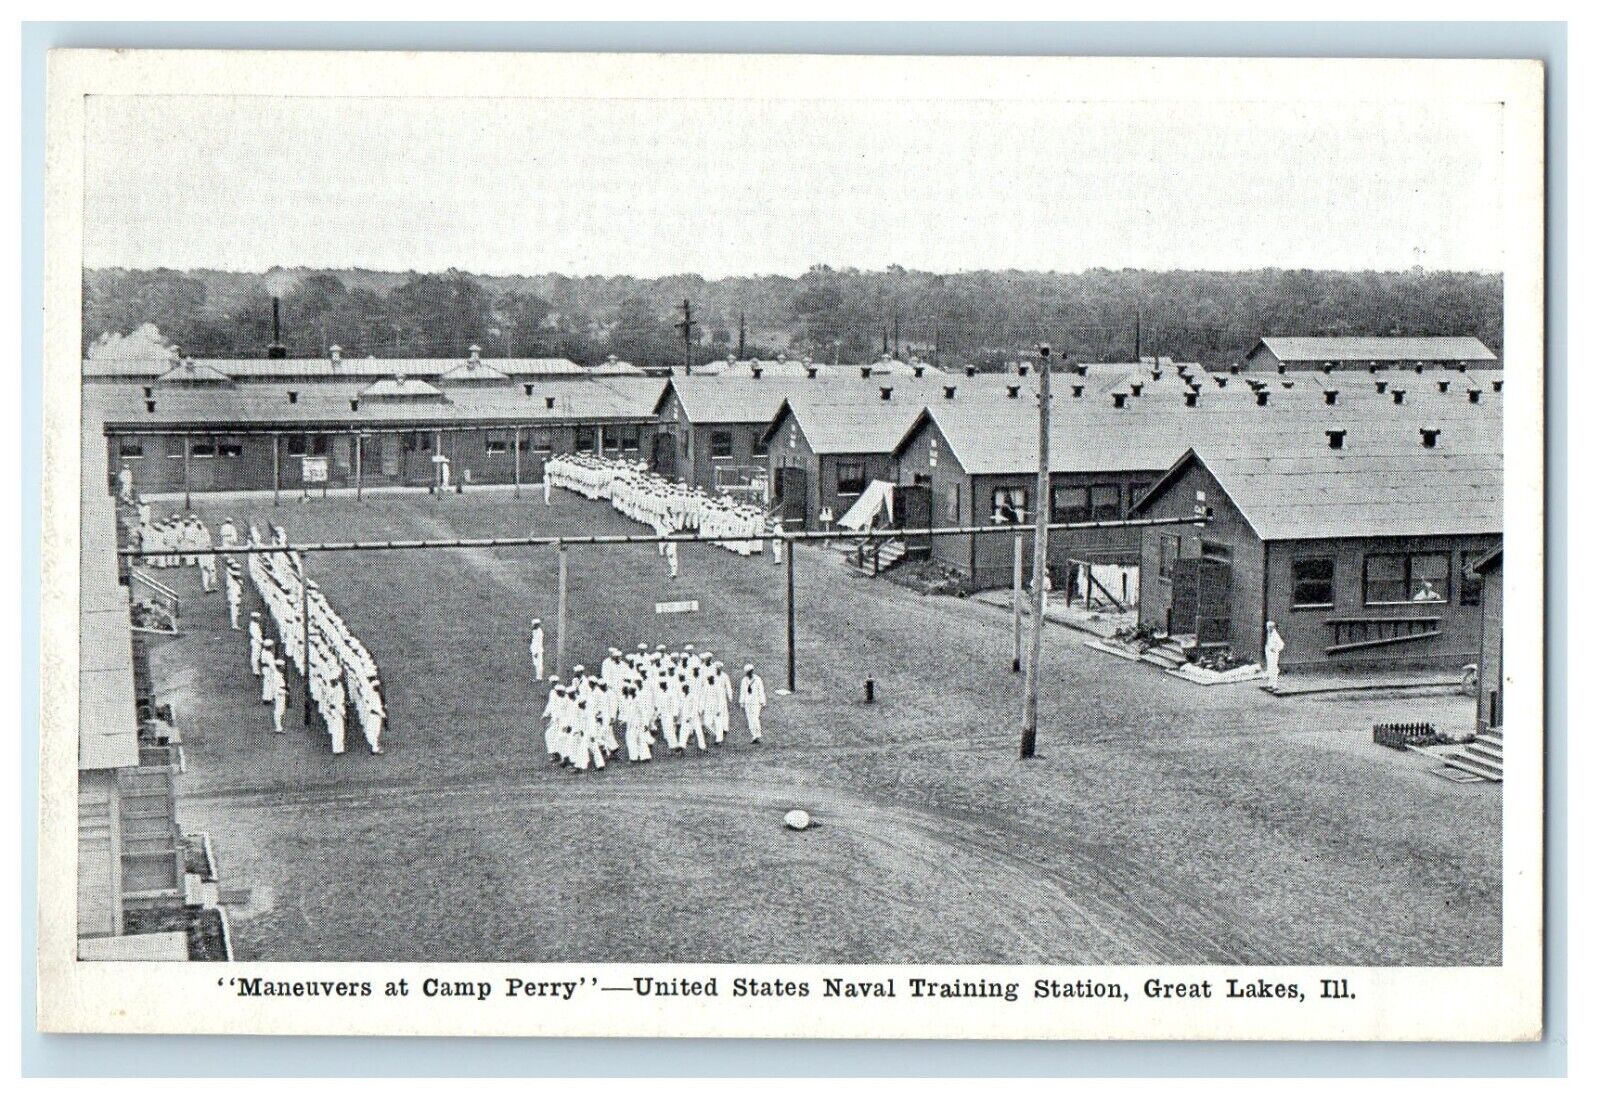 Great Lakes IL, Maneuvers At Camp Perry Naval Training Station Postcard